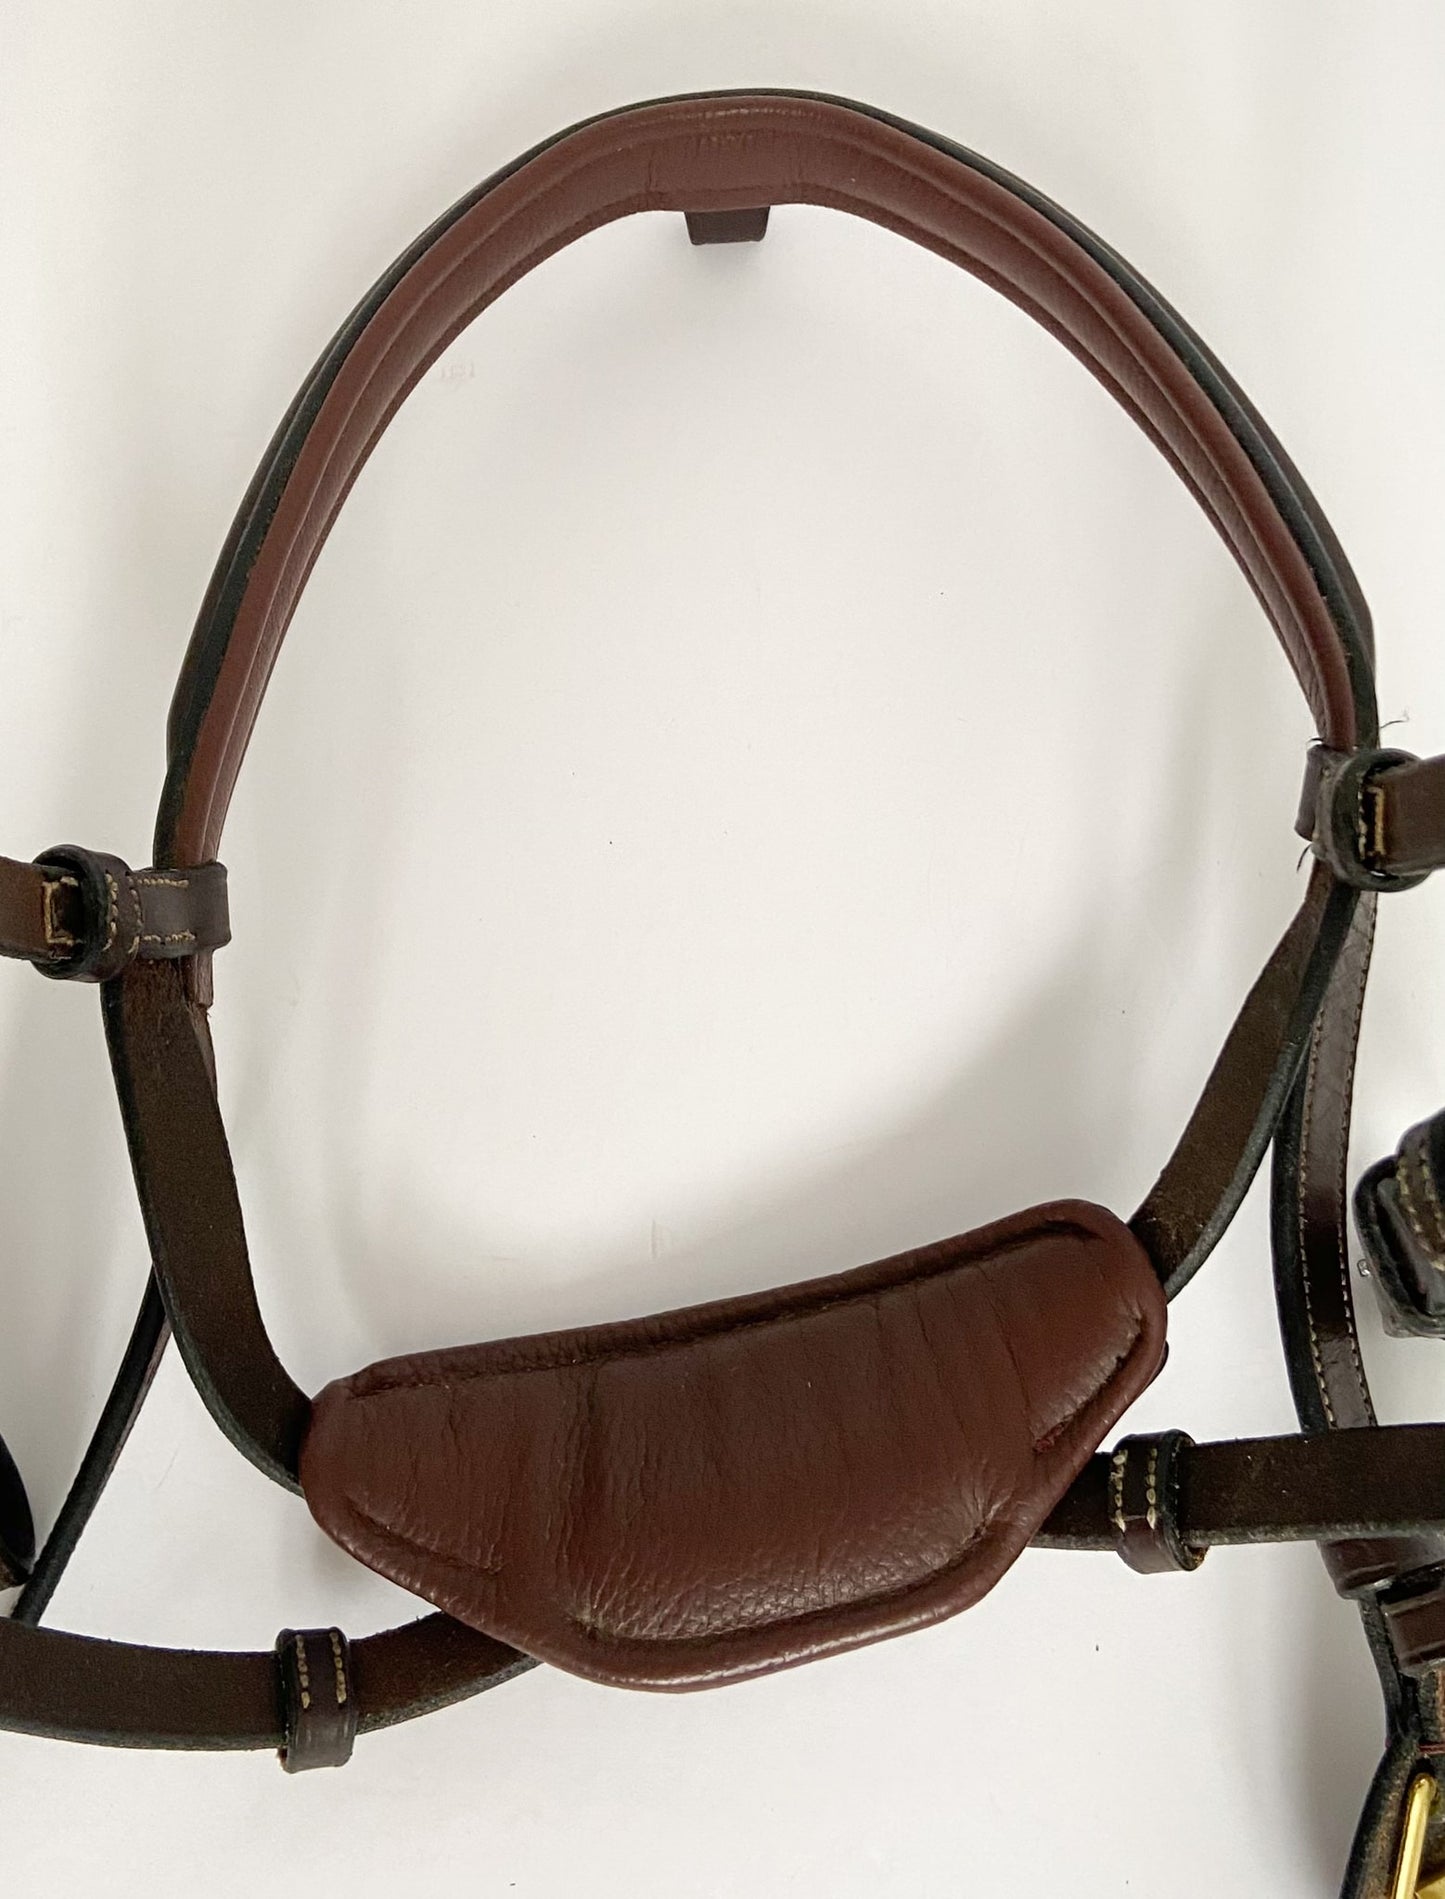 Dy'on Difference Bridle - Brown - Full